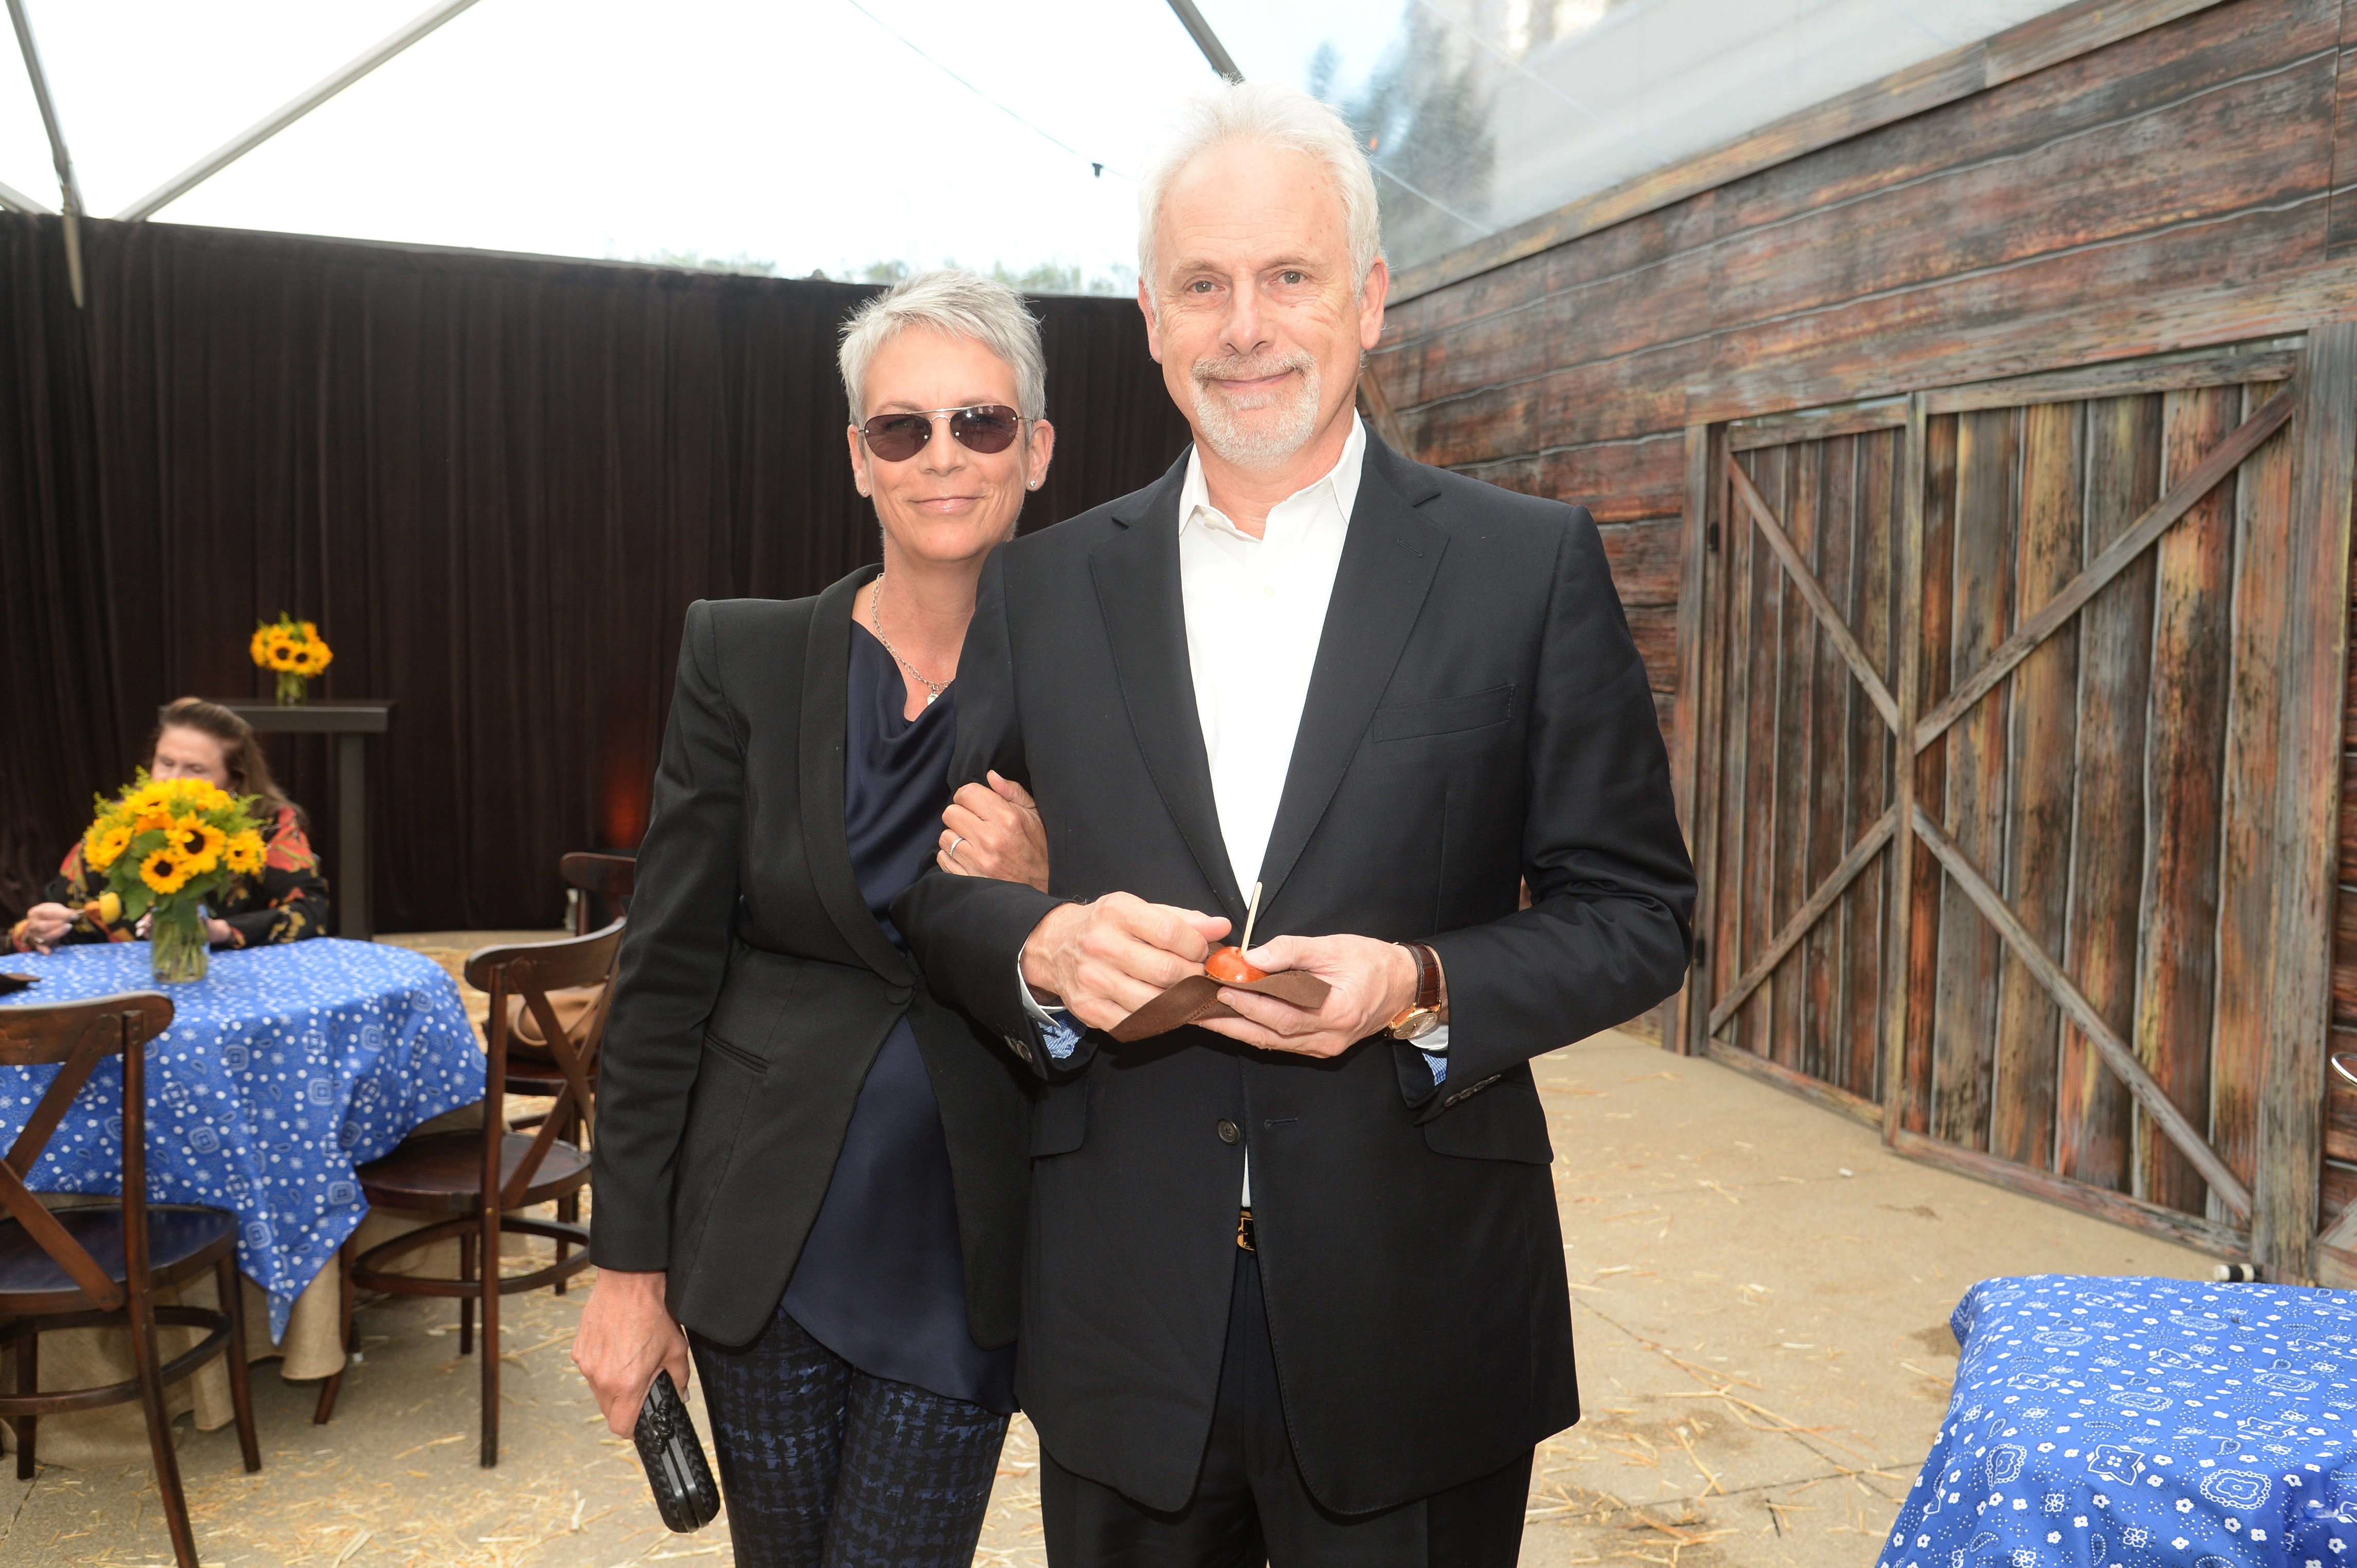 Jamie Lee Curtis and Christopher Guest attend the Annenberg Space for Photography Opening Celebration for "Country, Portraits of an American Sound" at the Annenberg Space for Photography on May 22, 2014 | Photo: GettyImages